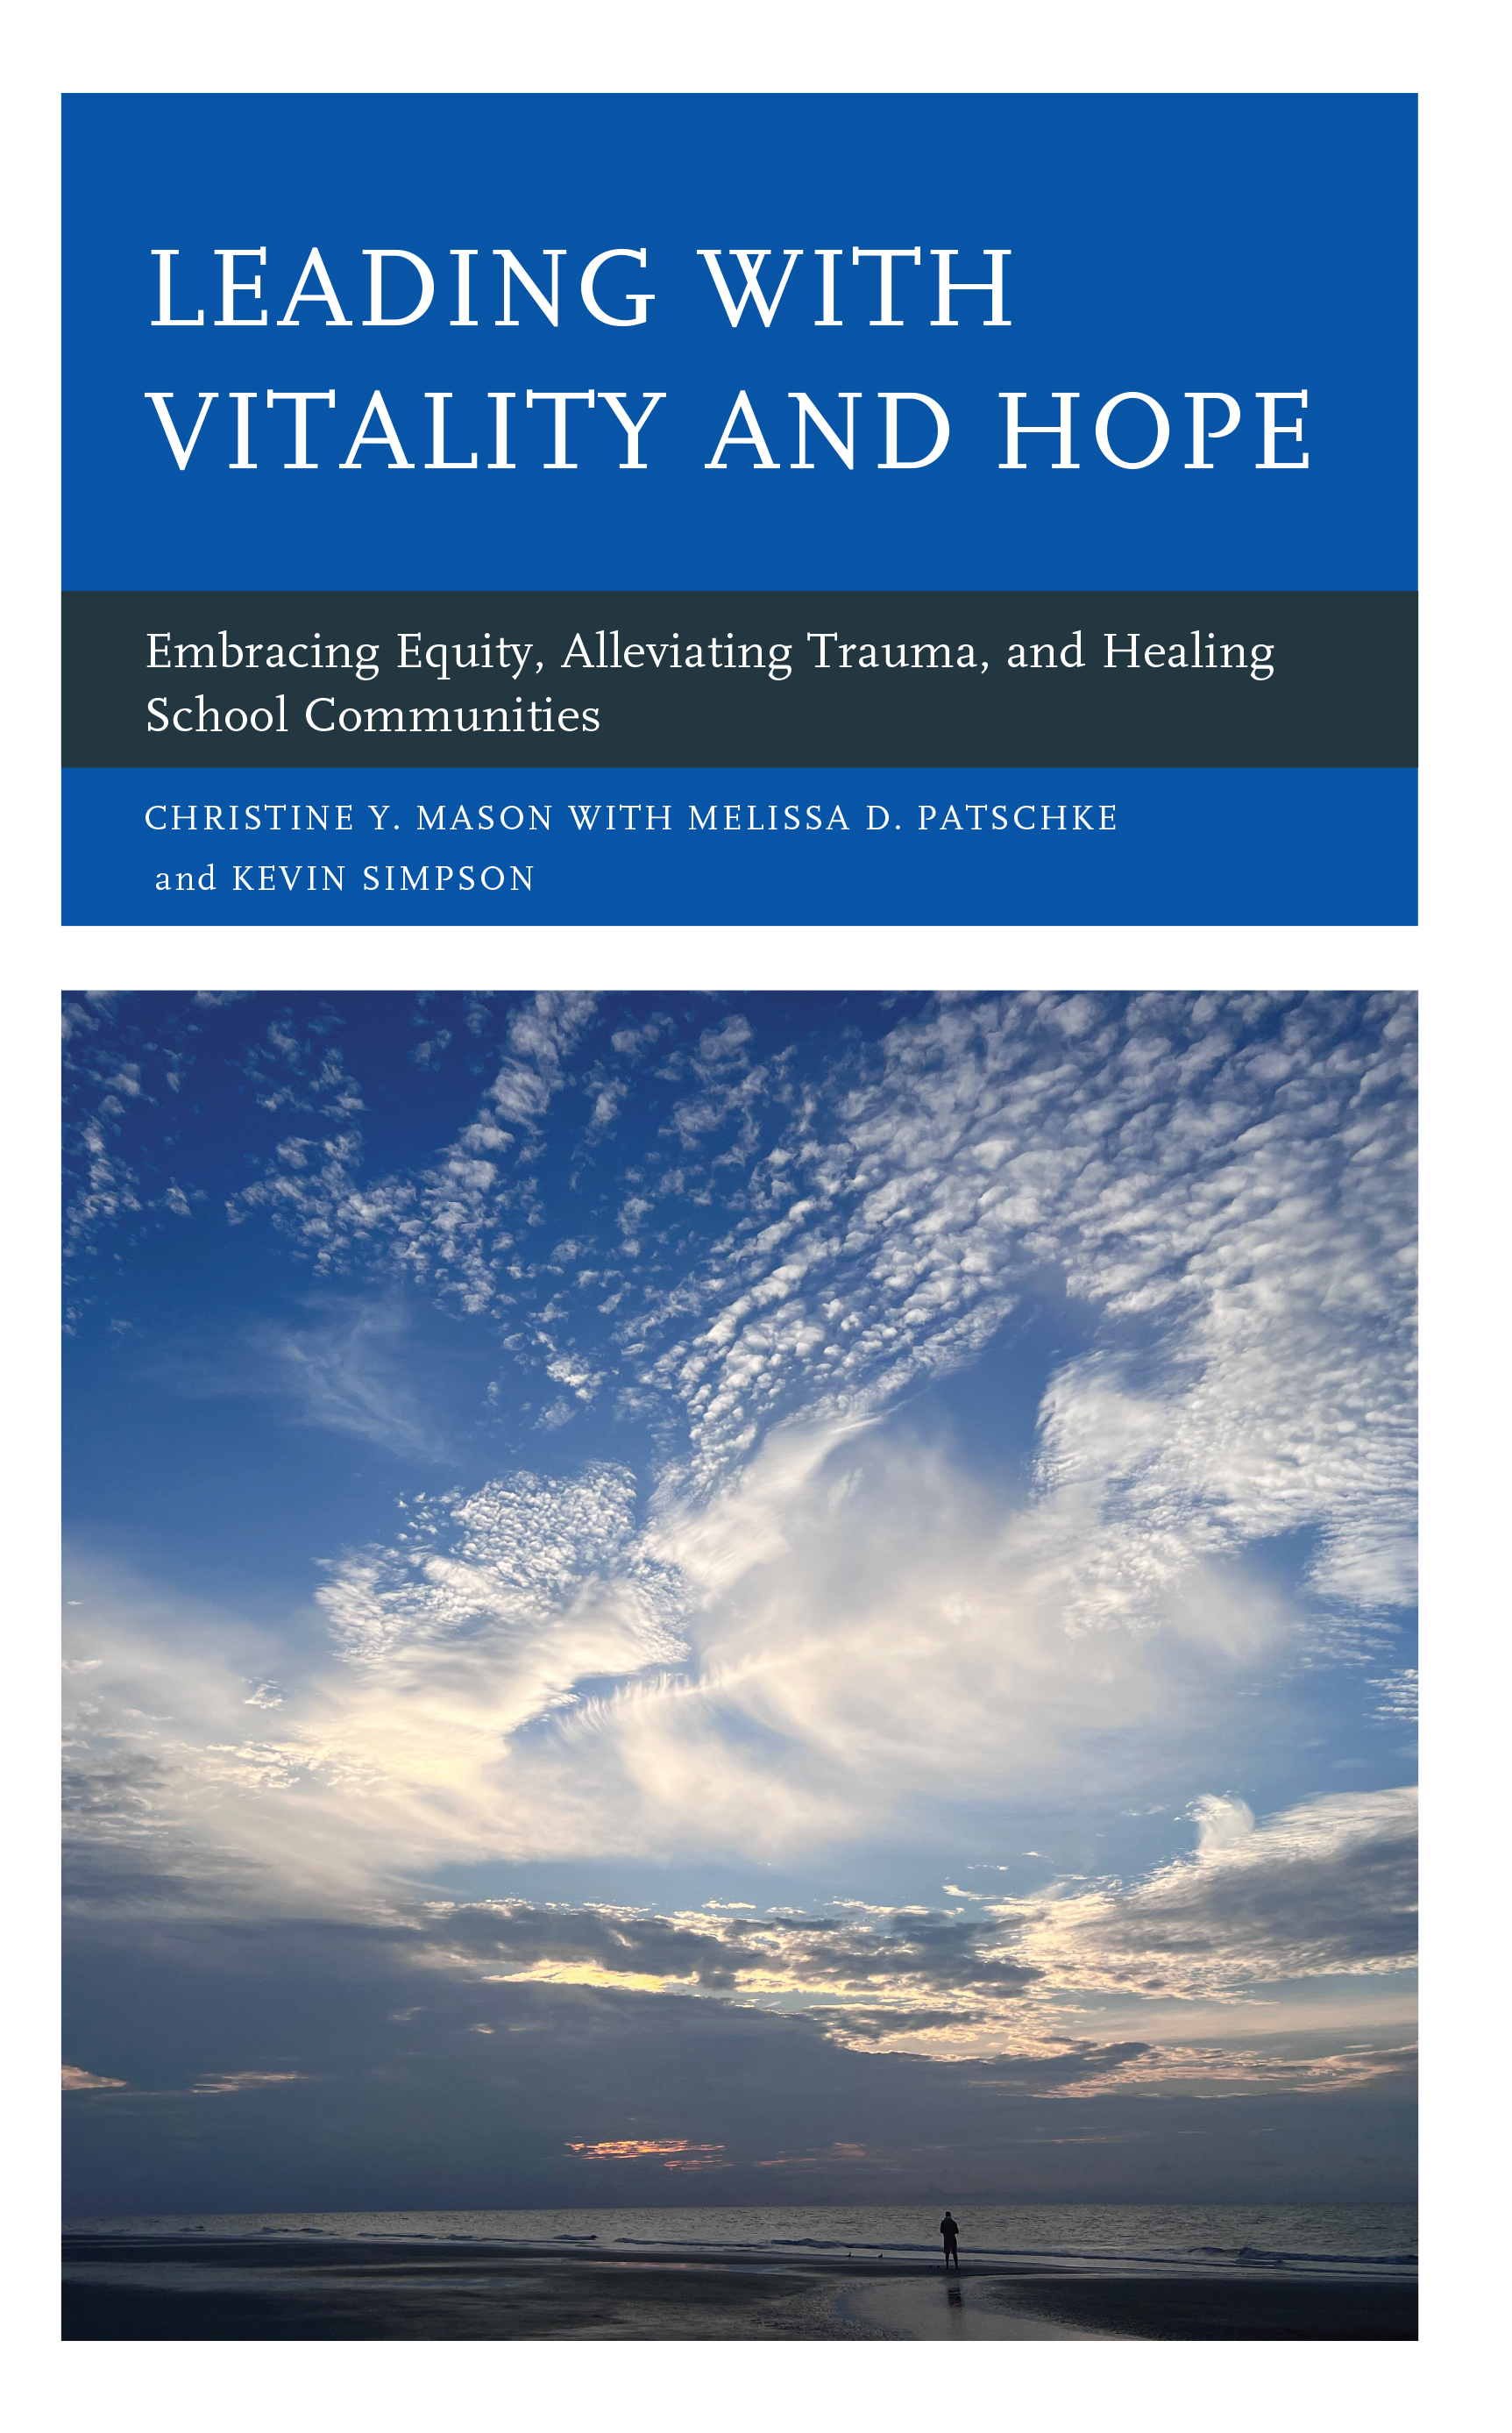 Leading with Vitality and Hope: Embracing Equity, Alleviating Trauma, and Healing School Communities